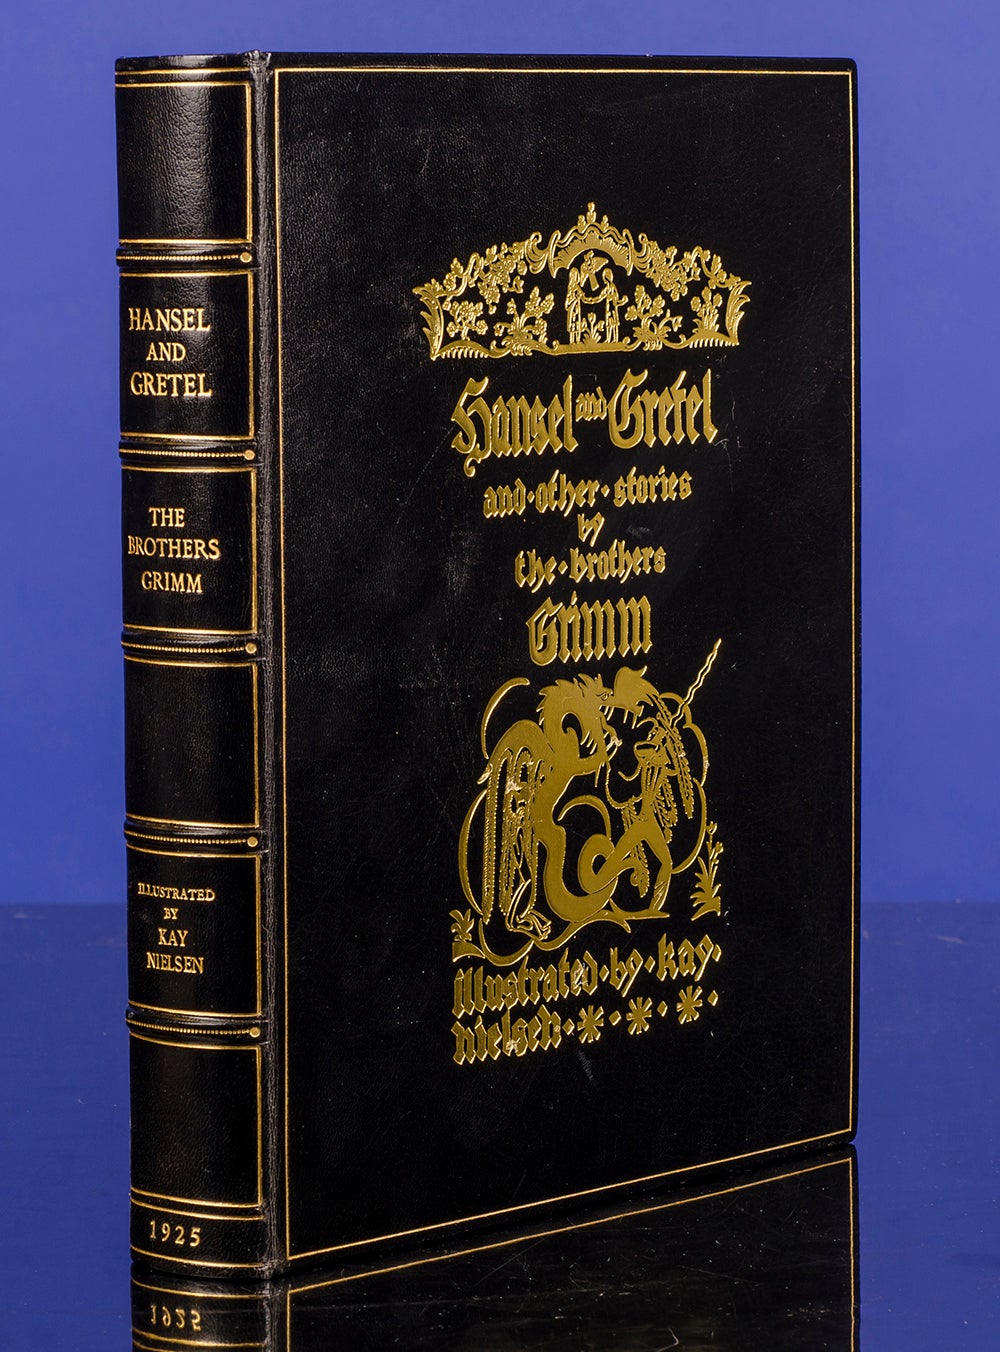 NIELSEN, Kay; Grimm, Jacob; Grimm, Wilhelm - Hansel and Gretel and Other Stories by the Brothers Grimm